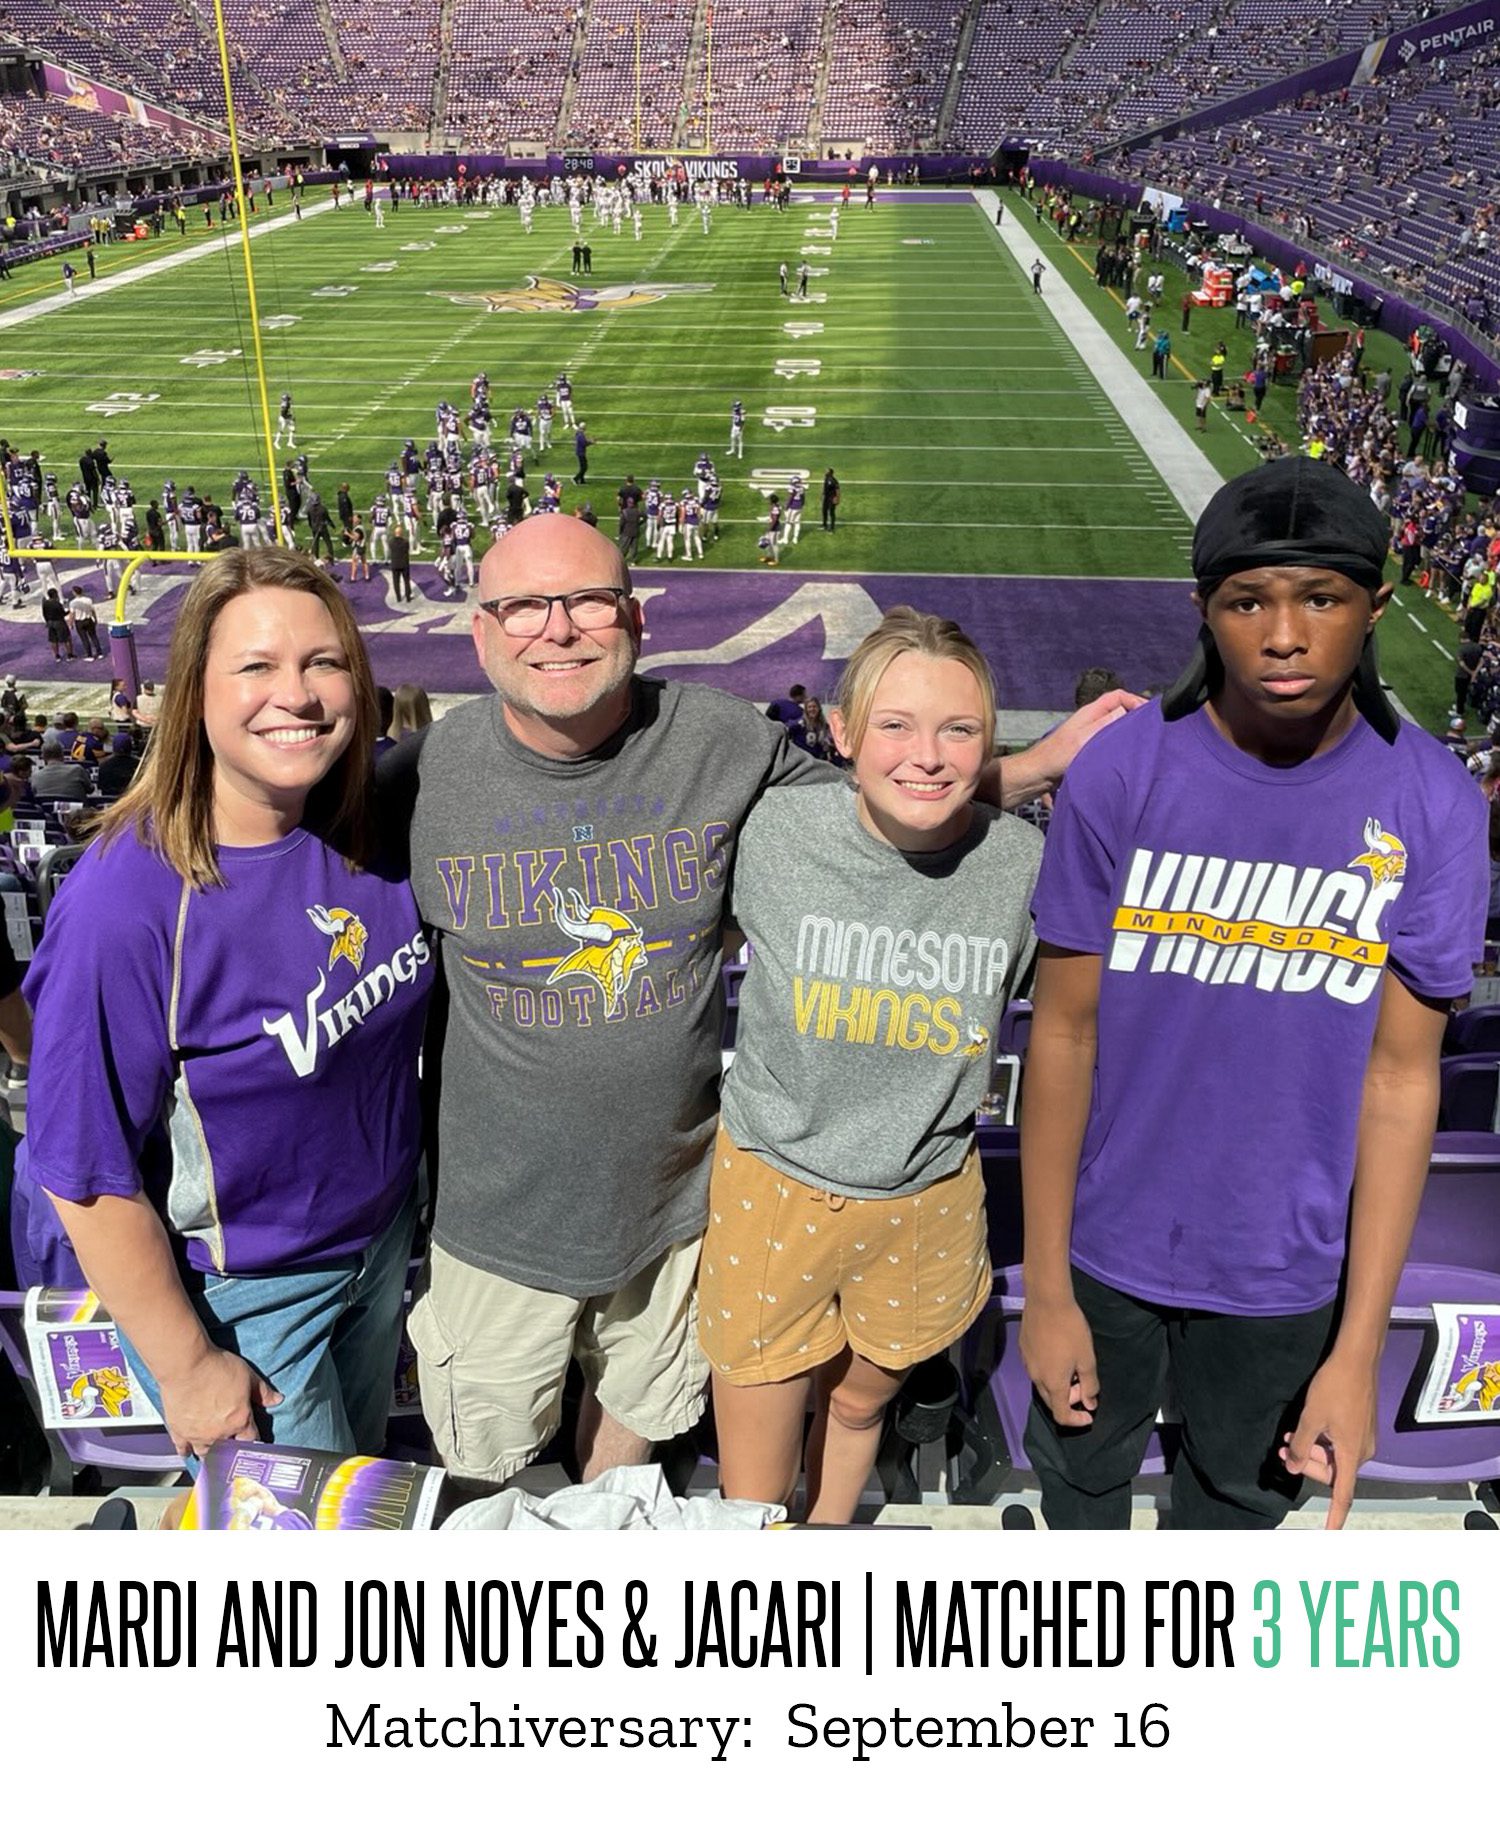 Mardi and Jon Noyes pose with their Little, Jacari, at a Vikings game